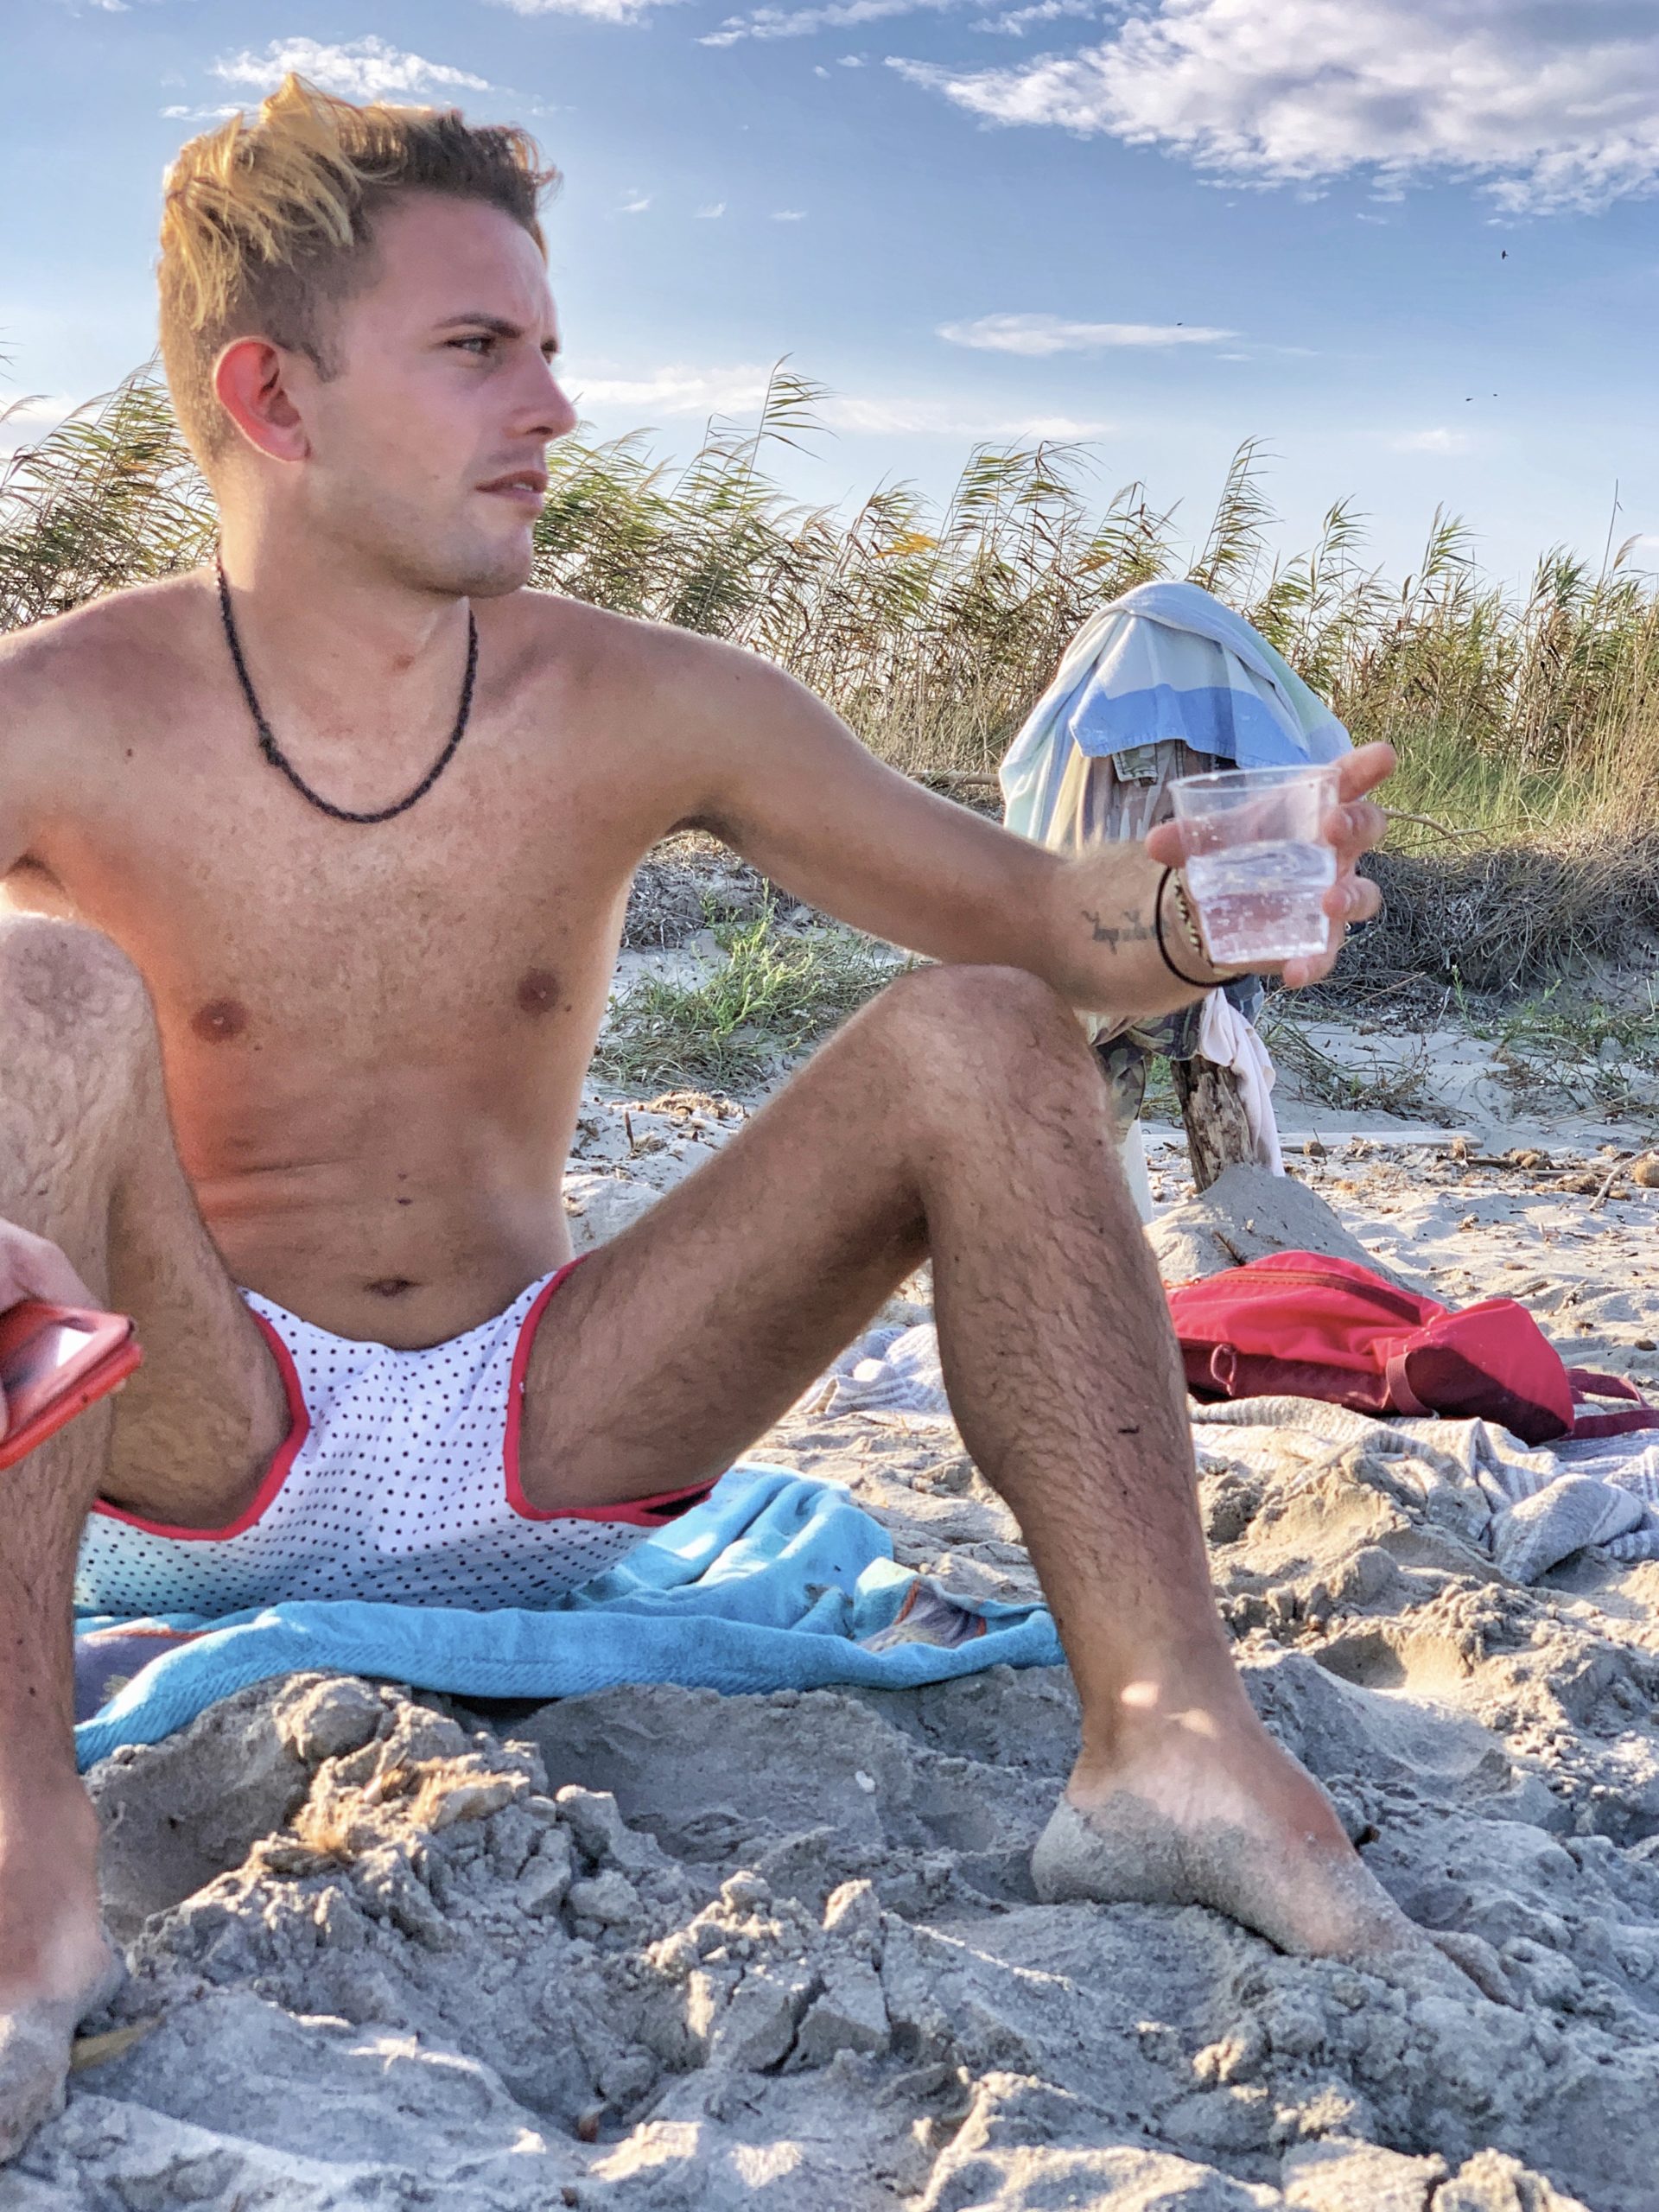 Gay Puglia - the Big Gay Podcast from Puglia. Serving up Puglia’s finest food and destination recommendations. Italy’s best naturist and gay beaches are in Puglia.